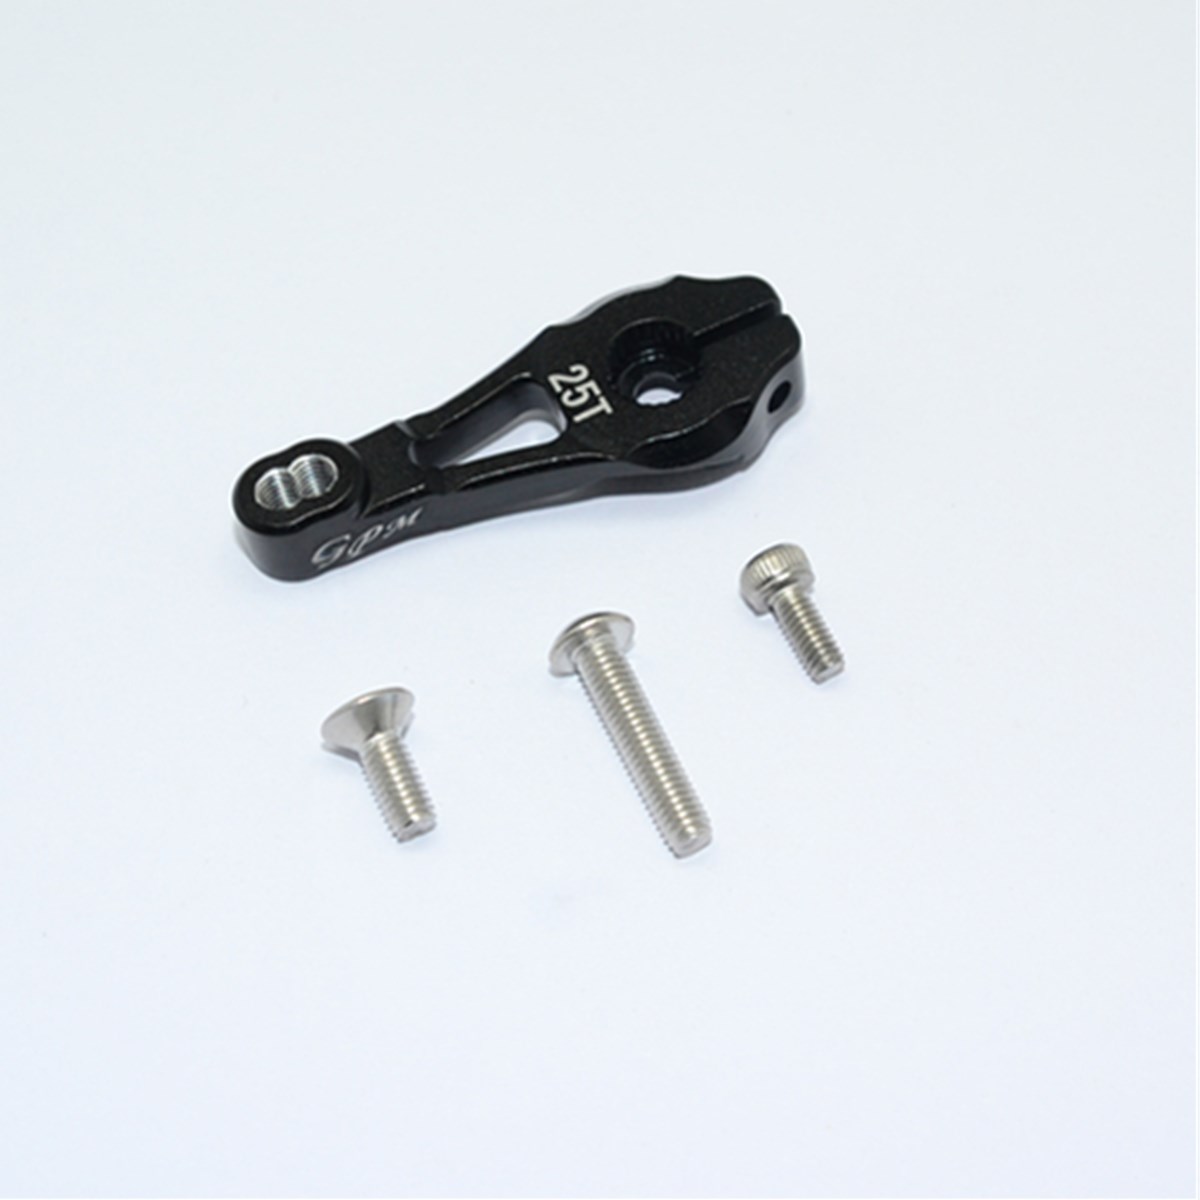 Aluminum-Alloy-Servo-Arm-With-Screws-Accessories-Suit-for-25T-Straight-Arm-Servo-1250410-2